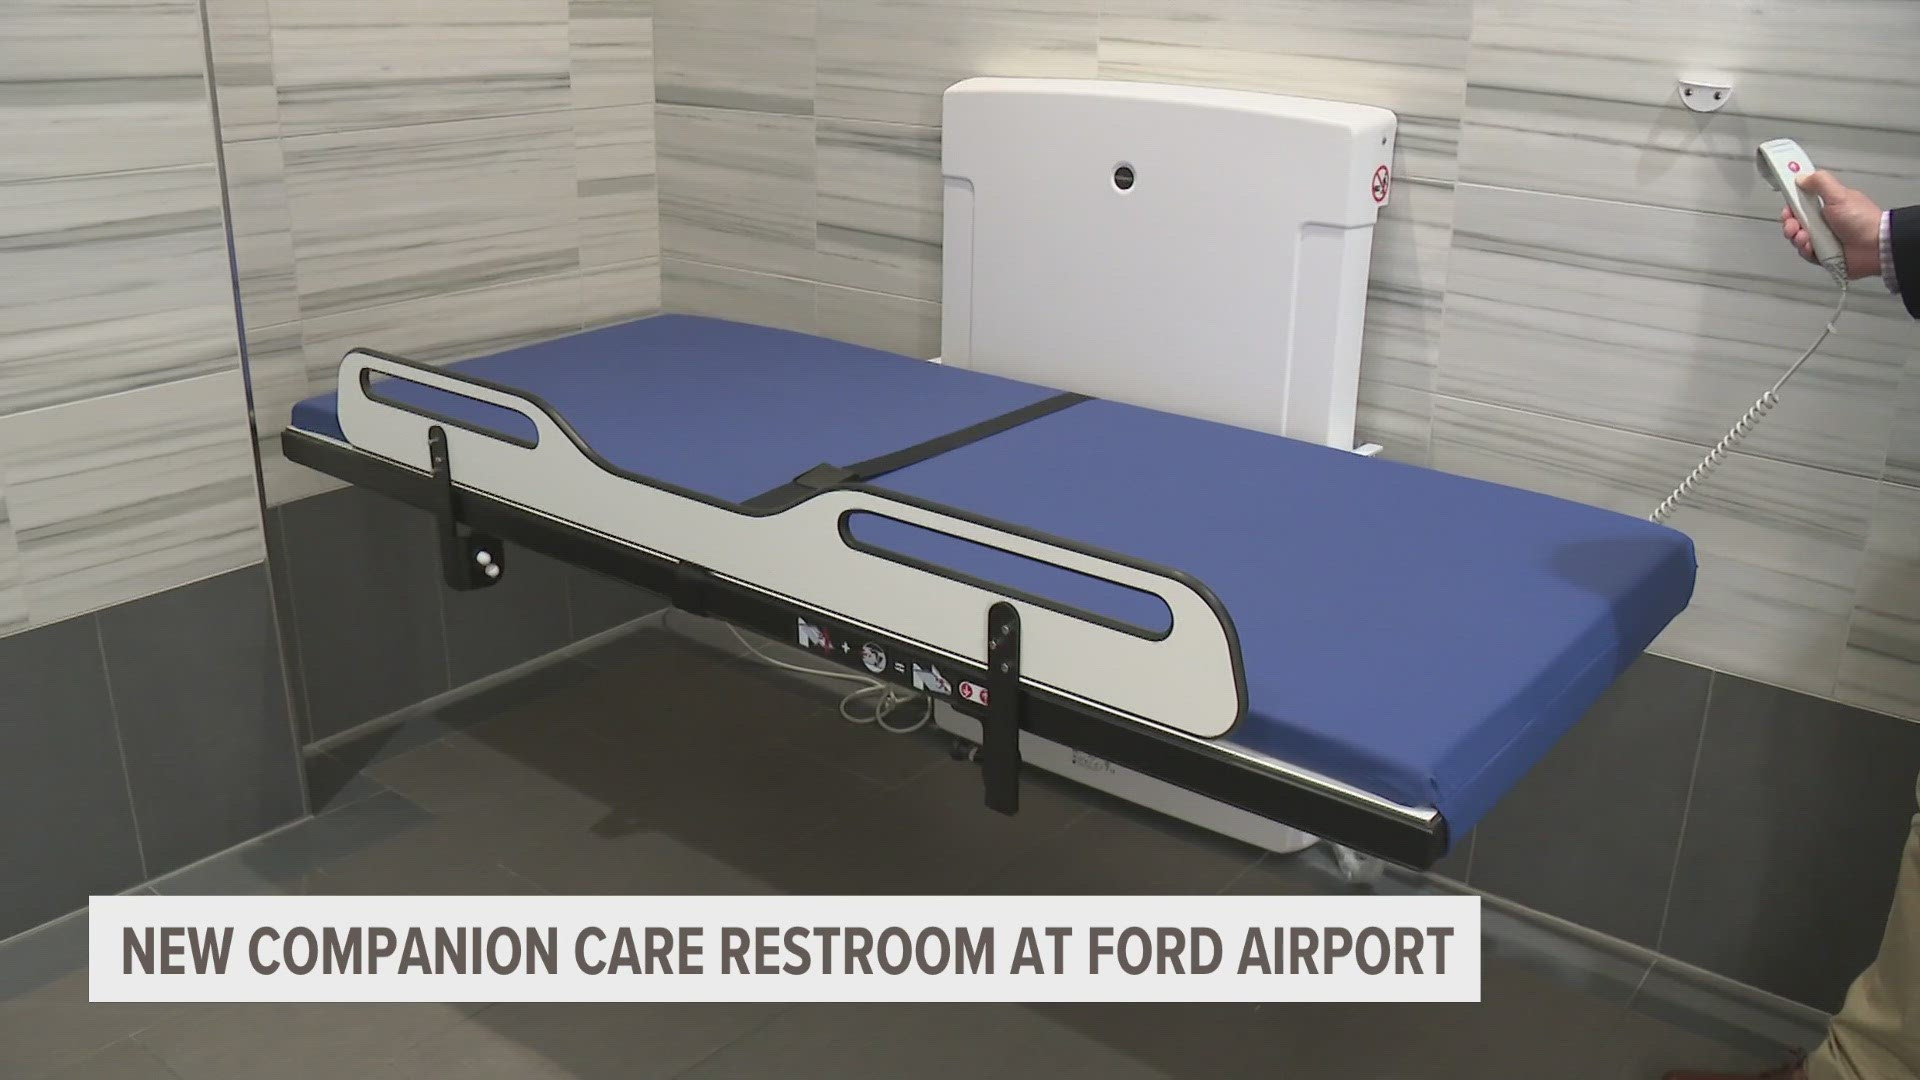 Gerald R. Ford International Airport is expanding access to those in need of companion care by opening a restroom outfitted with the accommodations needed.